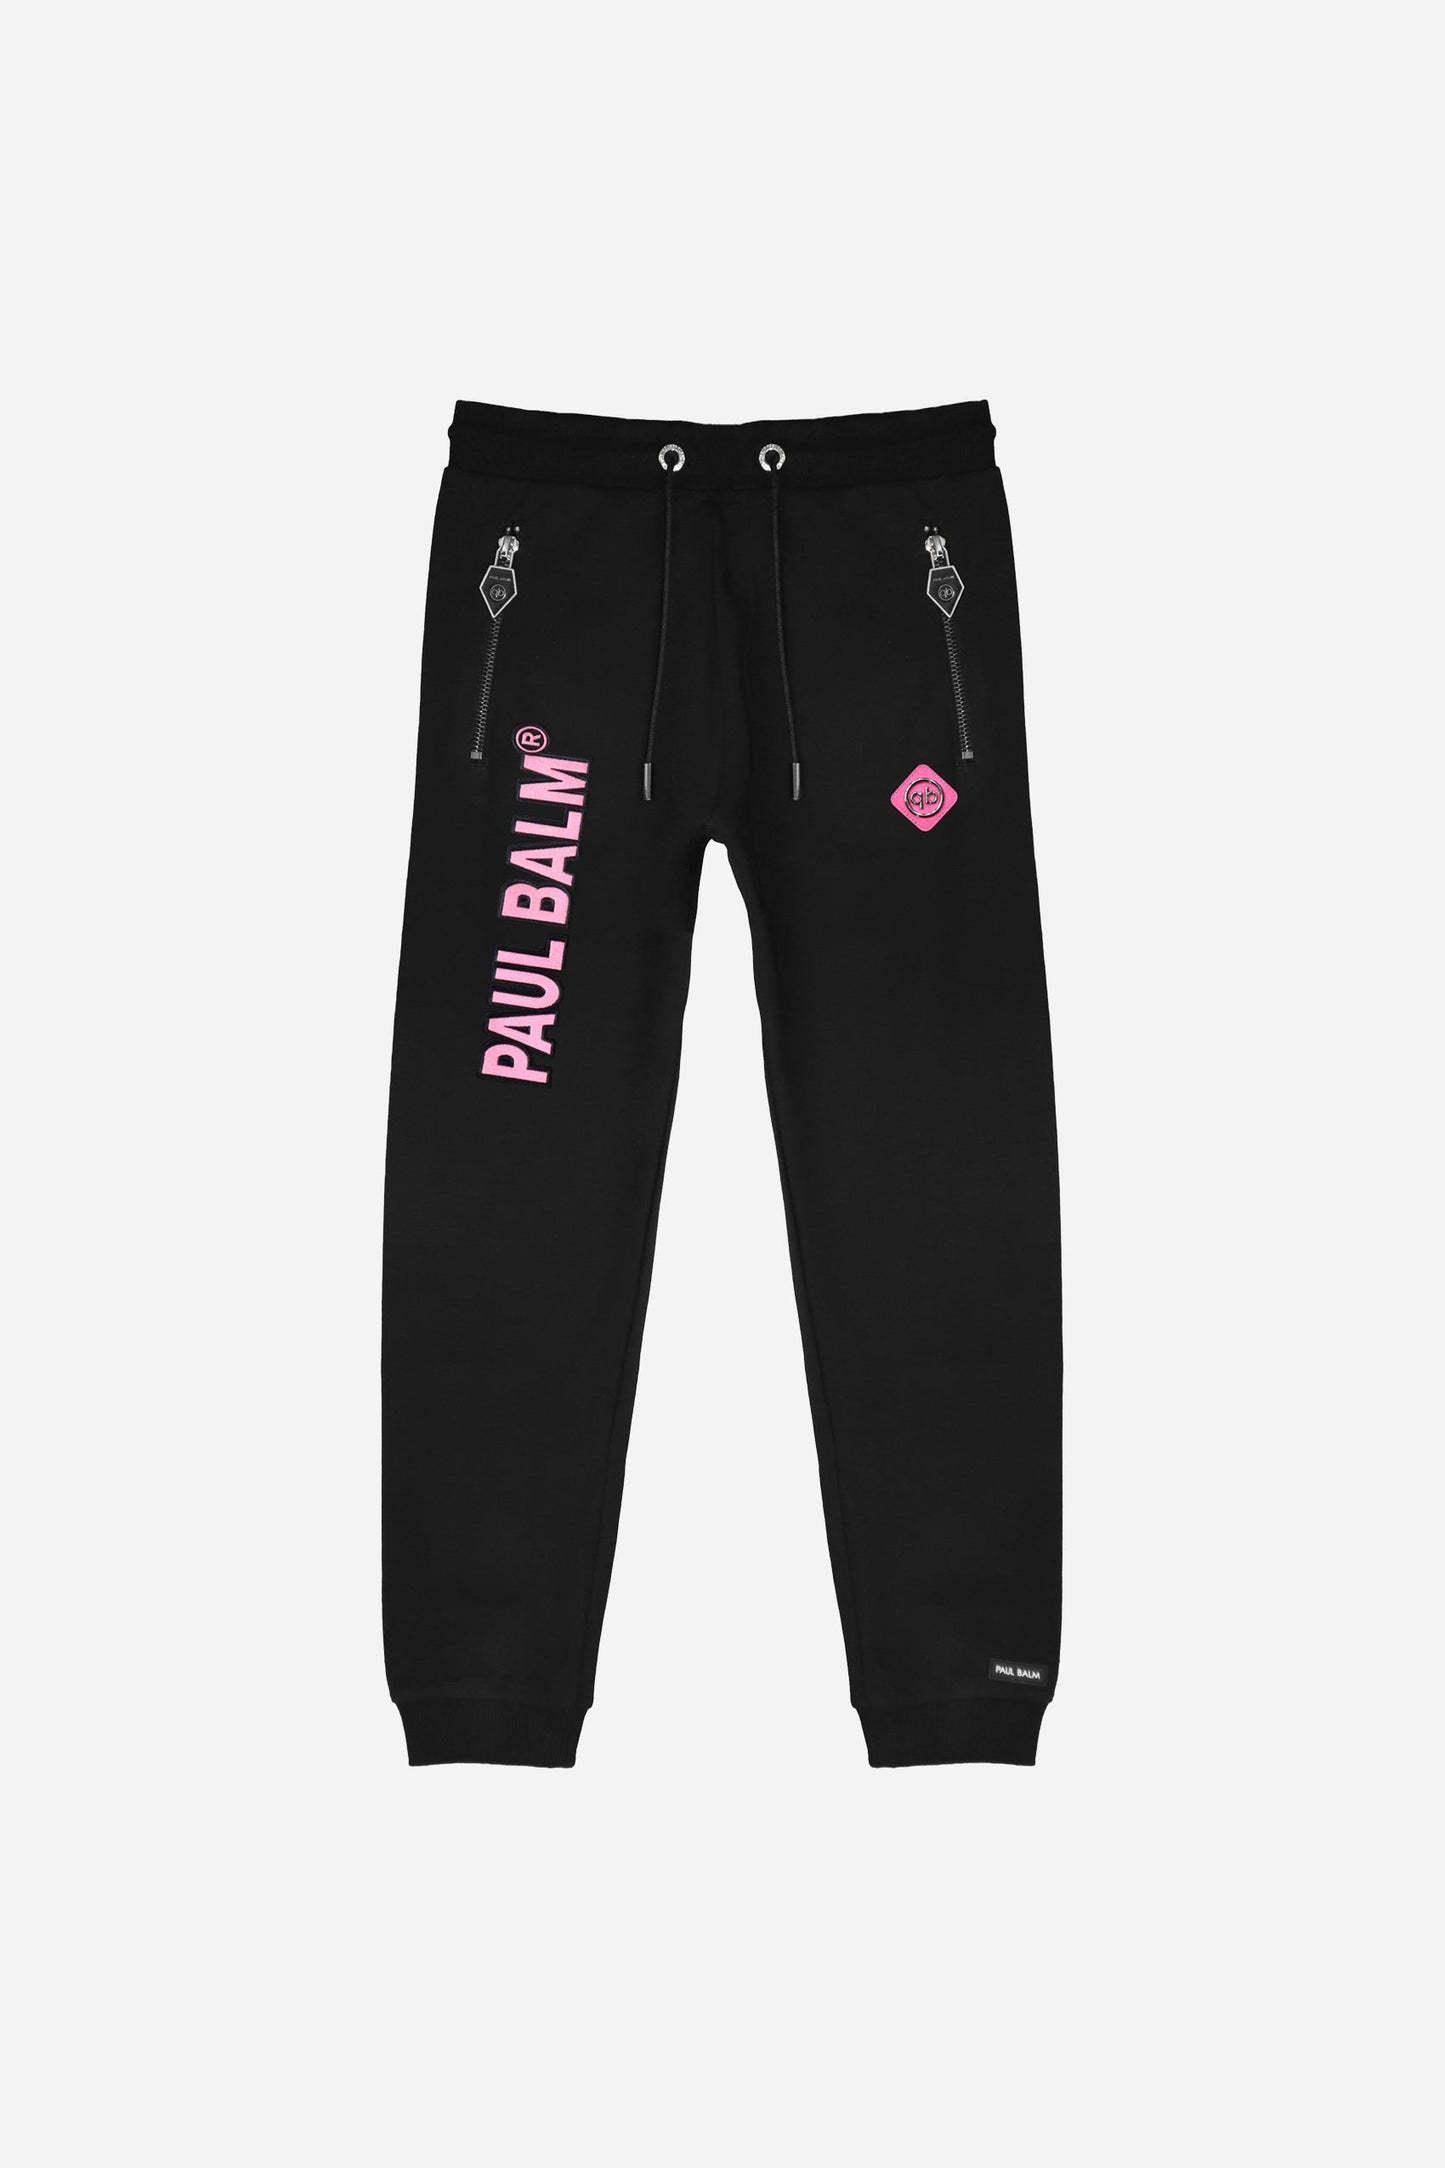 PAUL BALM Embroidery pink Set